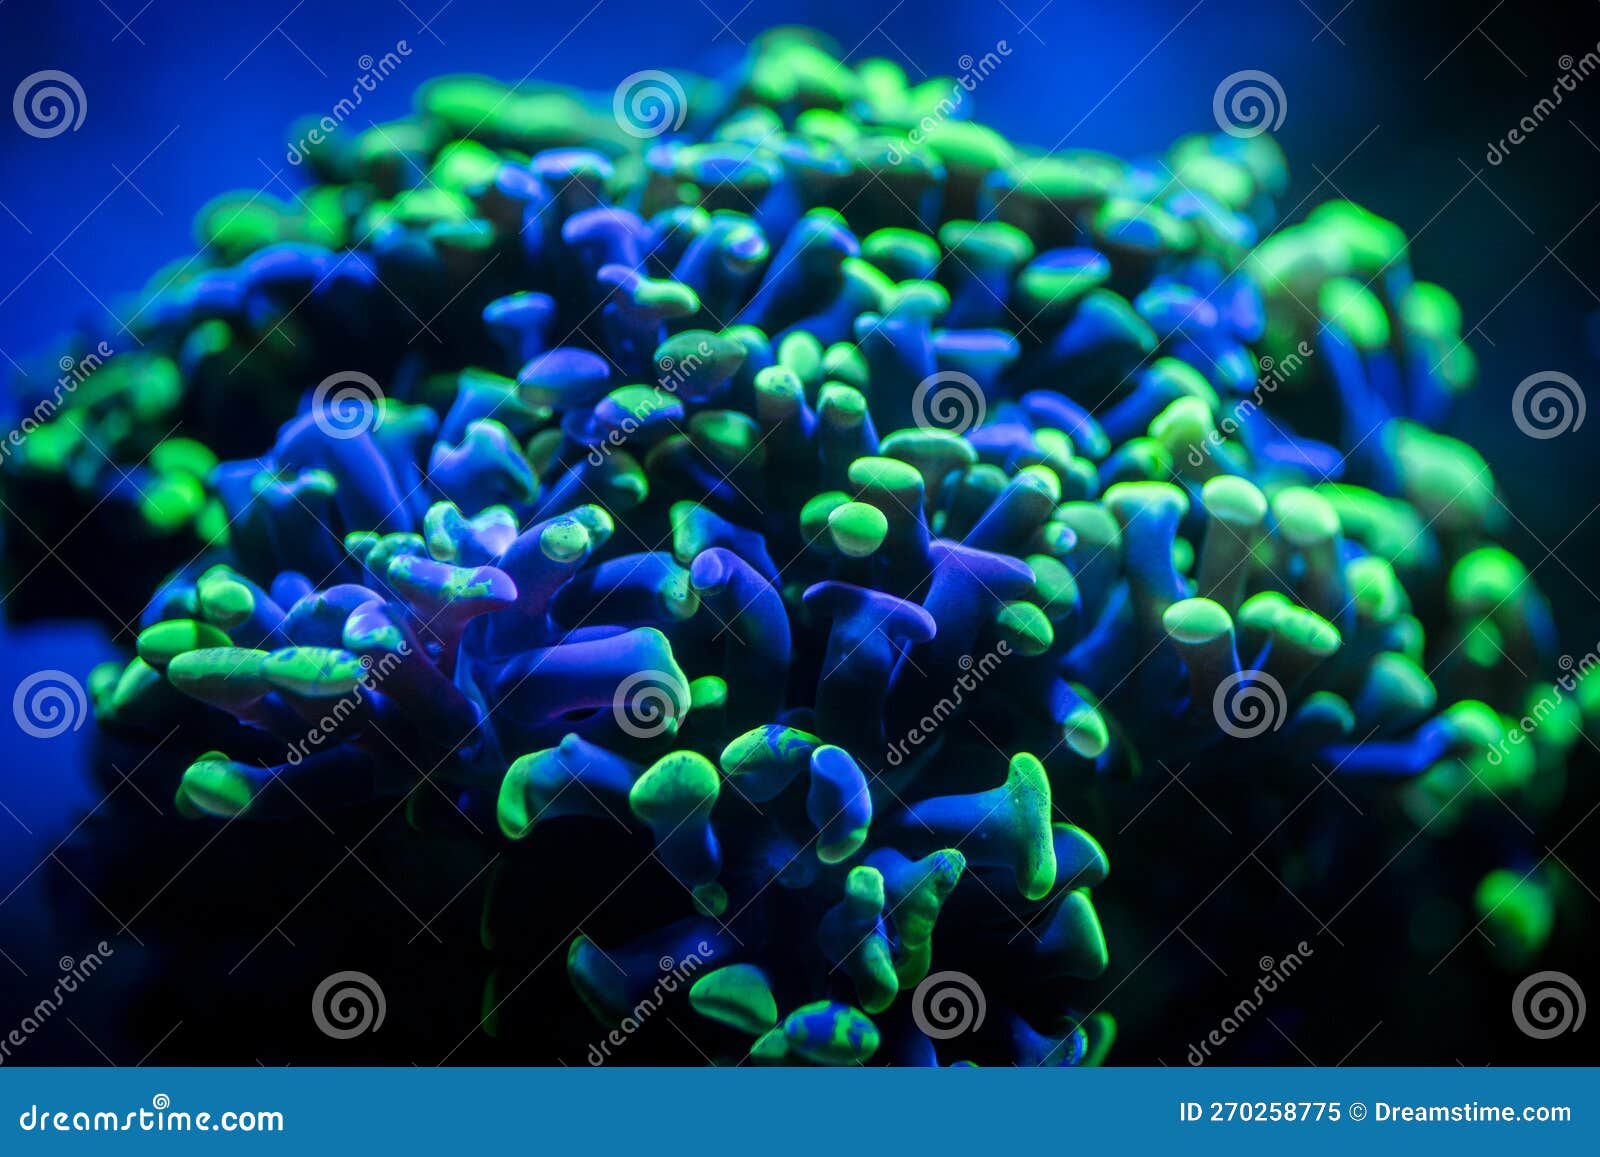 selective focus of euphyllia parancora (lps coral) showing its green fluorescence color on a reef aquarium